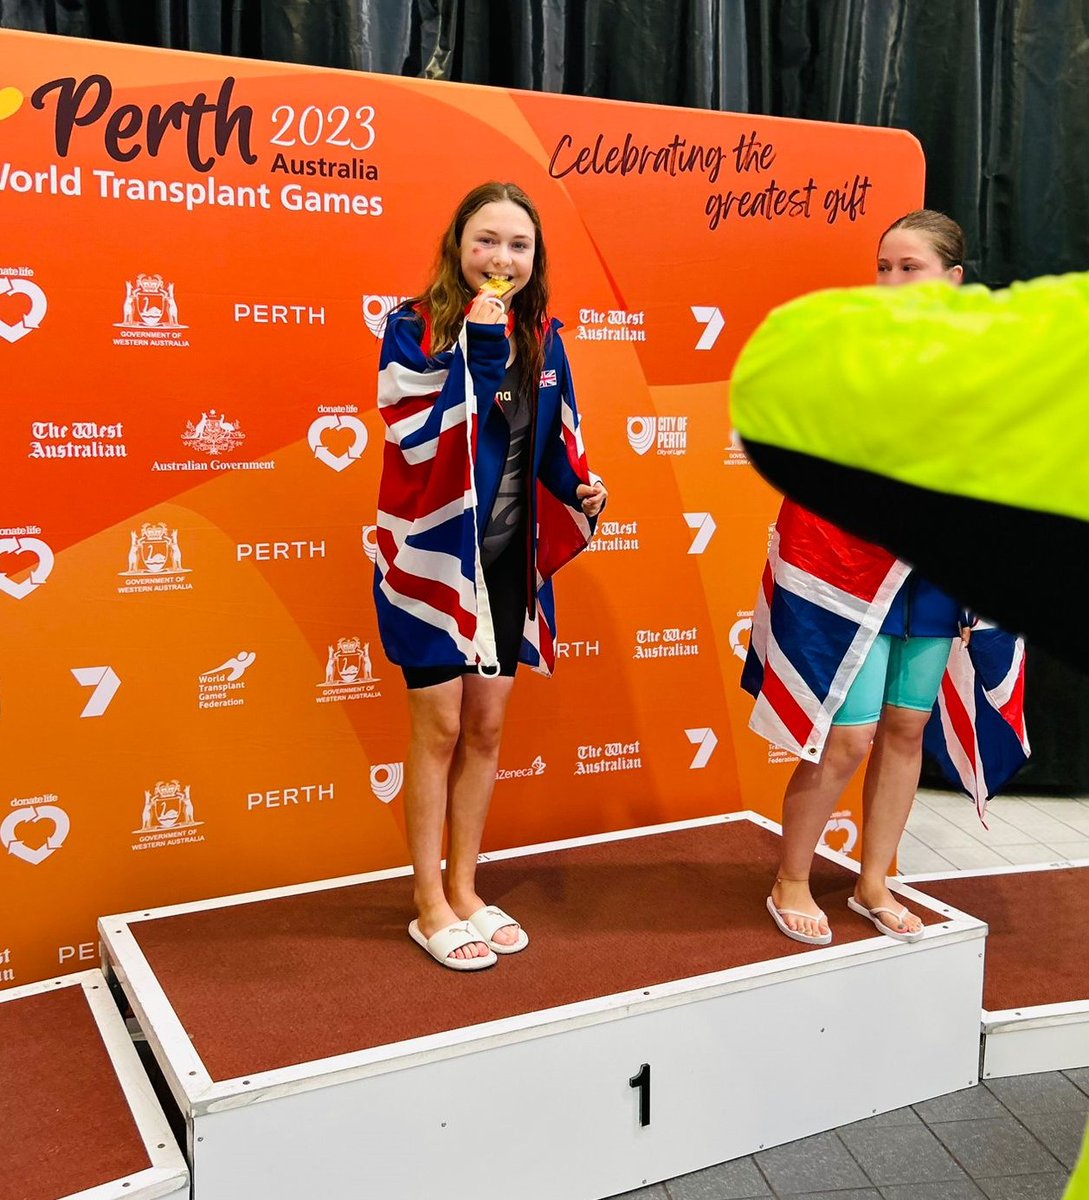 5 golds, 2 silvers and a new world record for Leeds Children's Transplant star and liver transplant recipient Ava, representing GB in the pool at the World Transplant Games in Perth this week. Well done Ava - a true inspiration 🥇 #worldtransplantgames #wtg2023